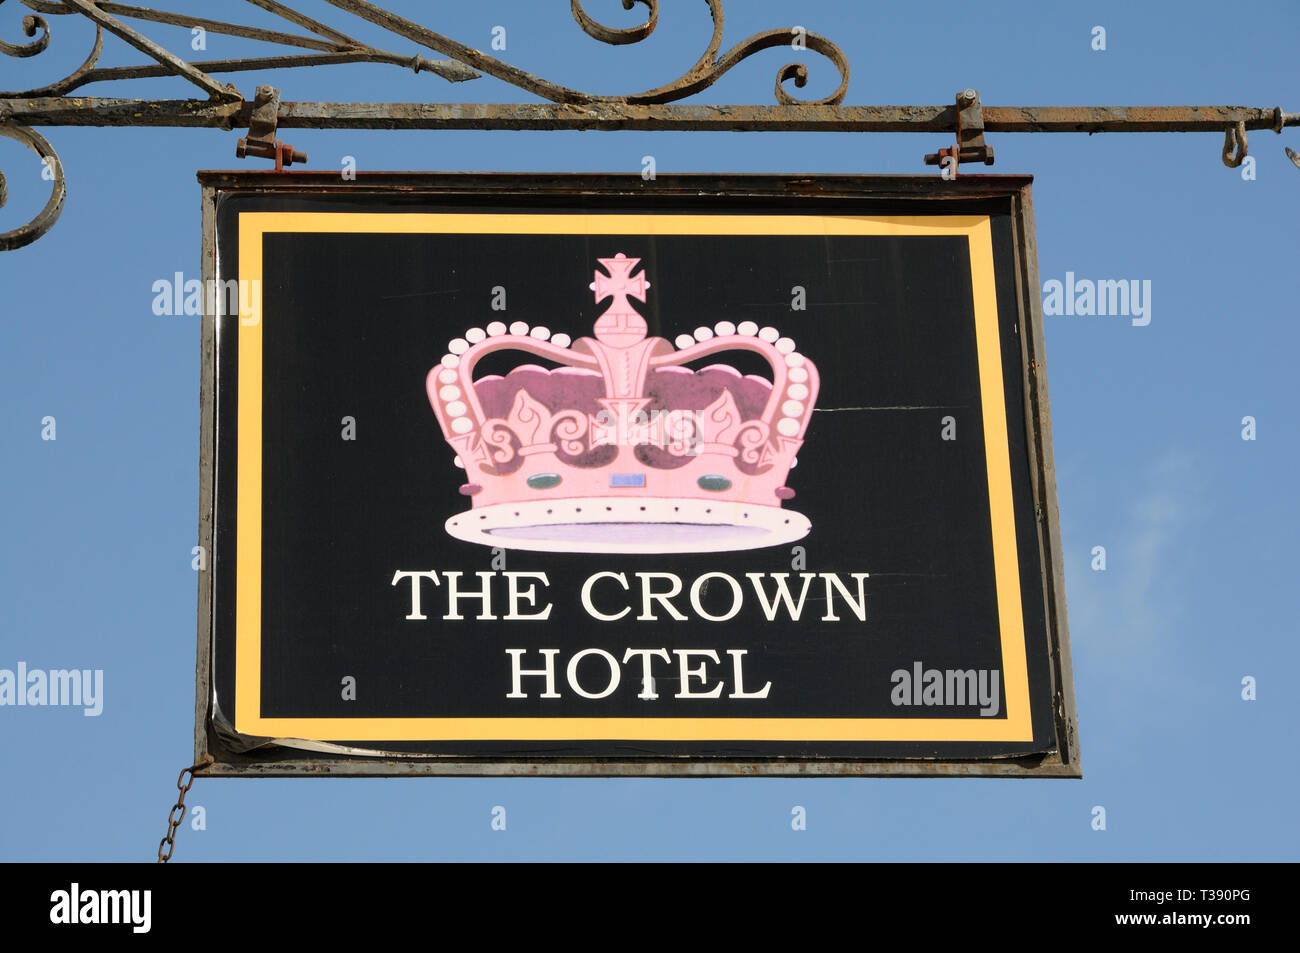 Crown Hotel, Brackley, Northamptonshire, is an old coaching inn which was the source of a fire in 1649 that burnt down a large part of the town. Stock Photo